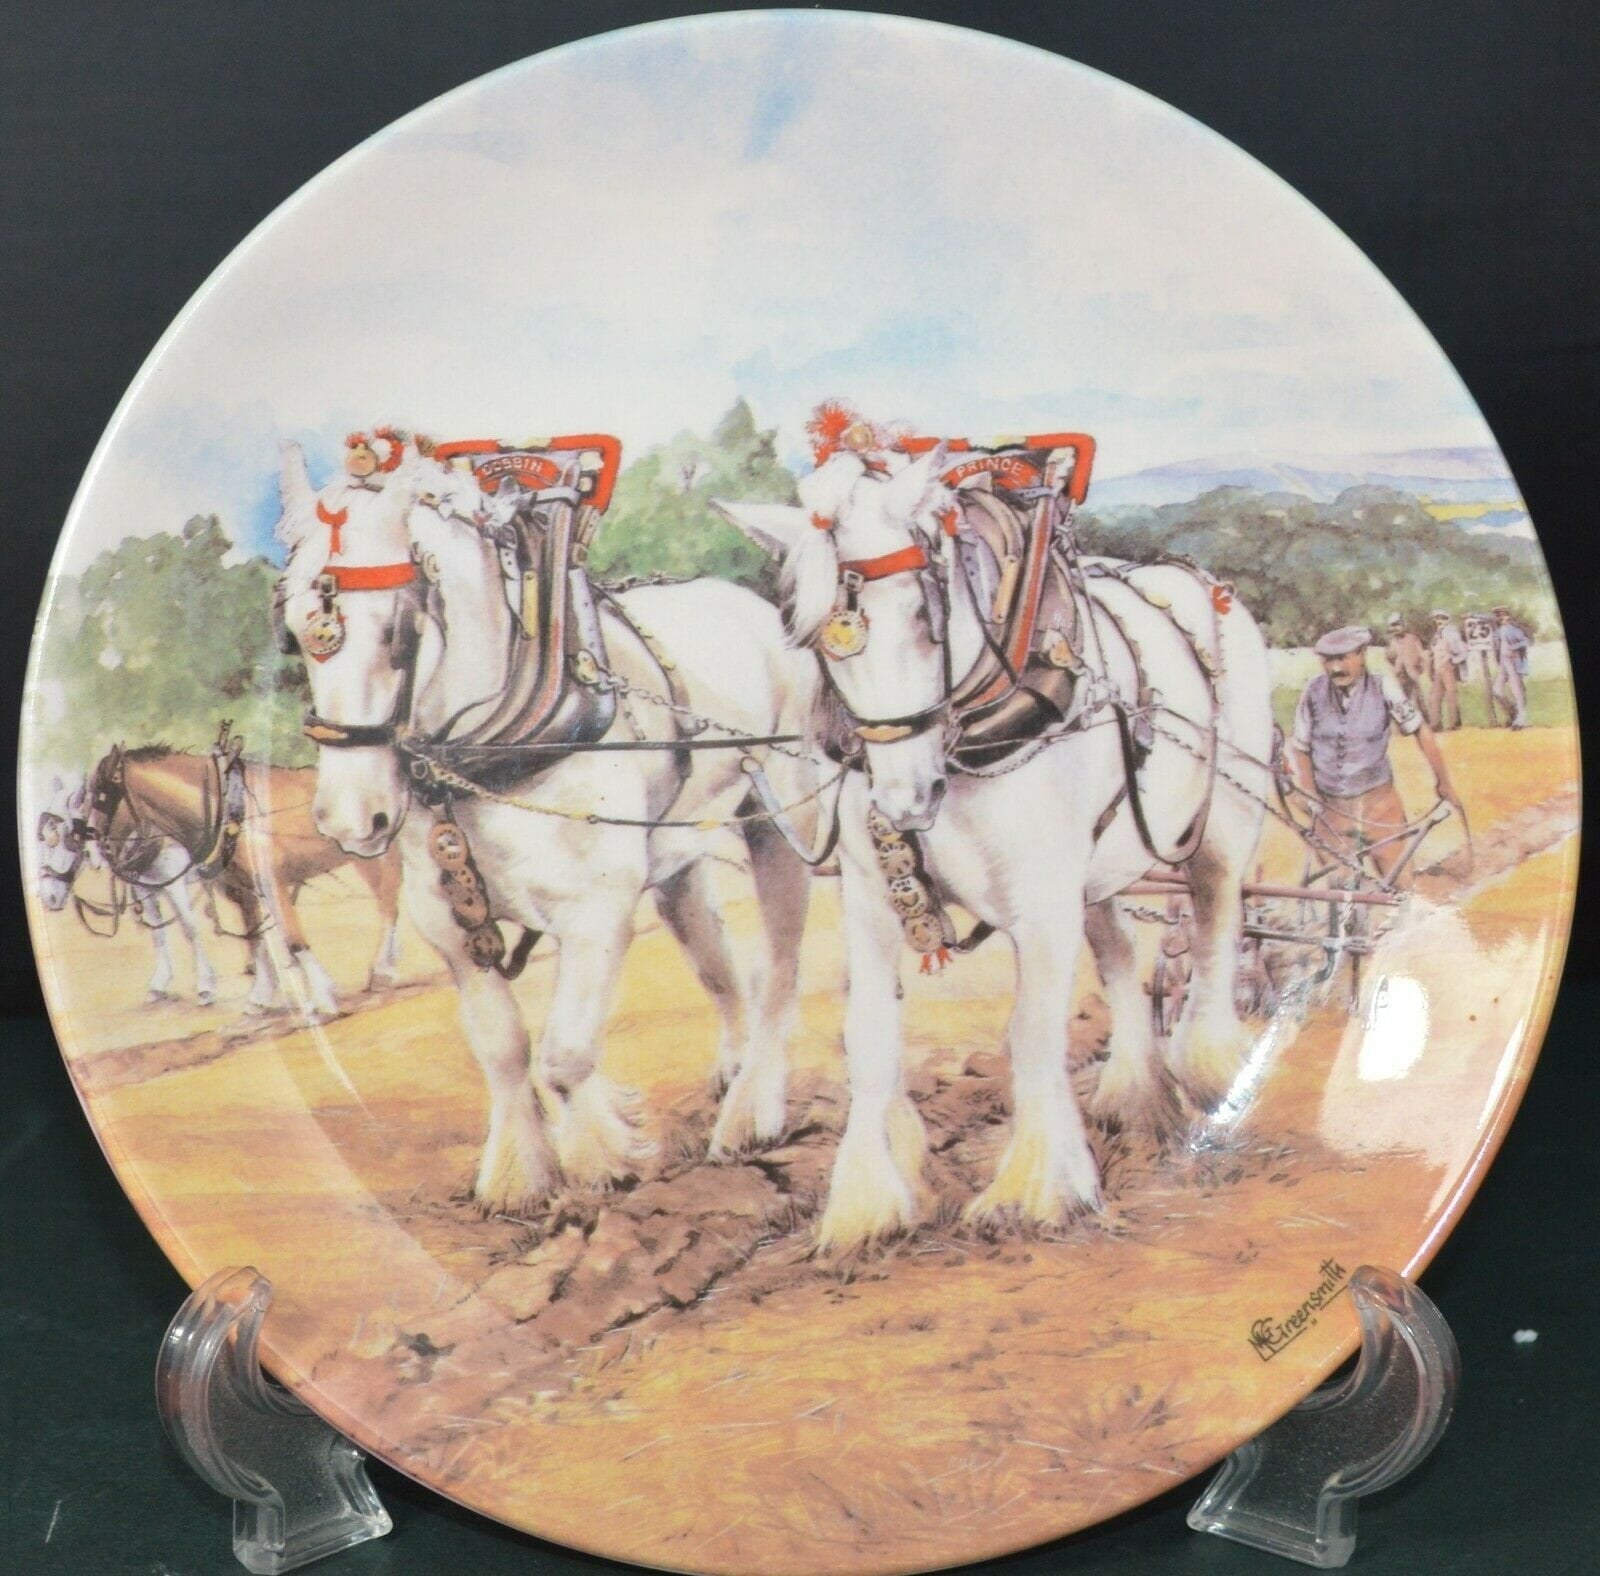 DANBURY MINT WORKING HORSES PLATE ENTITLED THE PLOUGHING MATCH(PREVIOUSLY OWNED) GOOD CONDITION - TMD167207